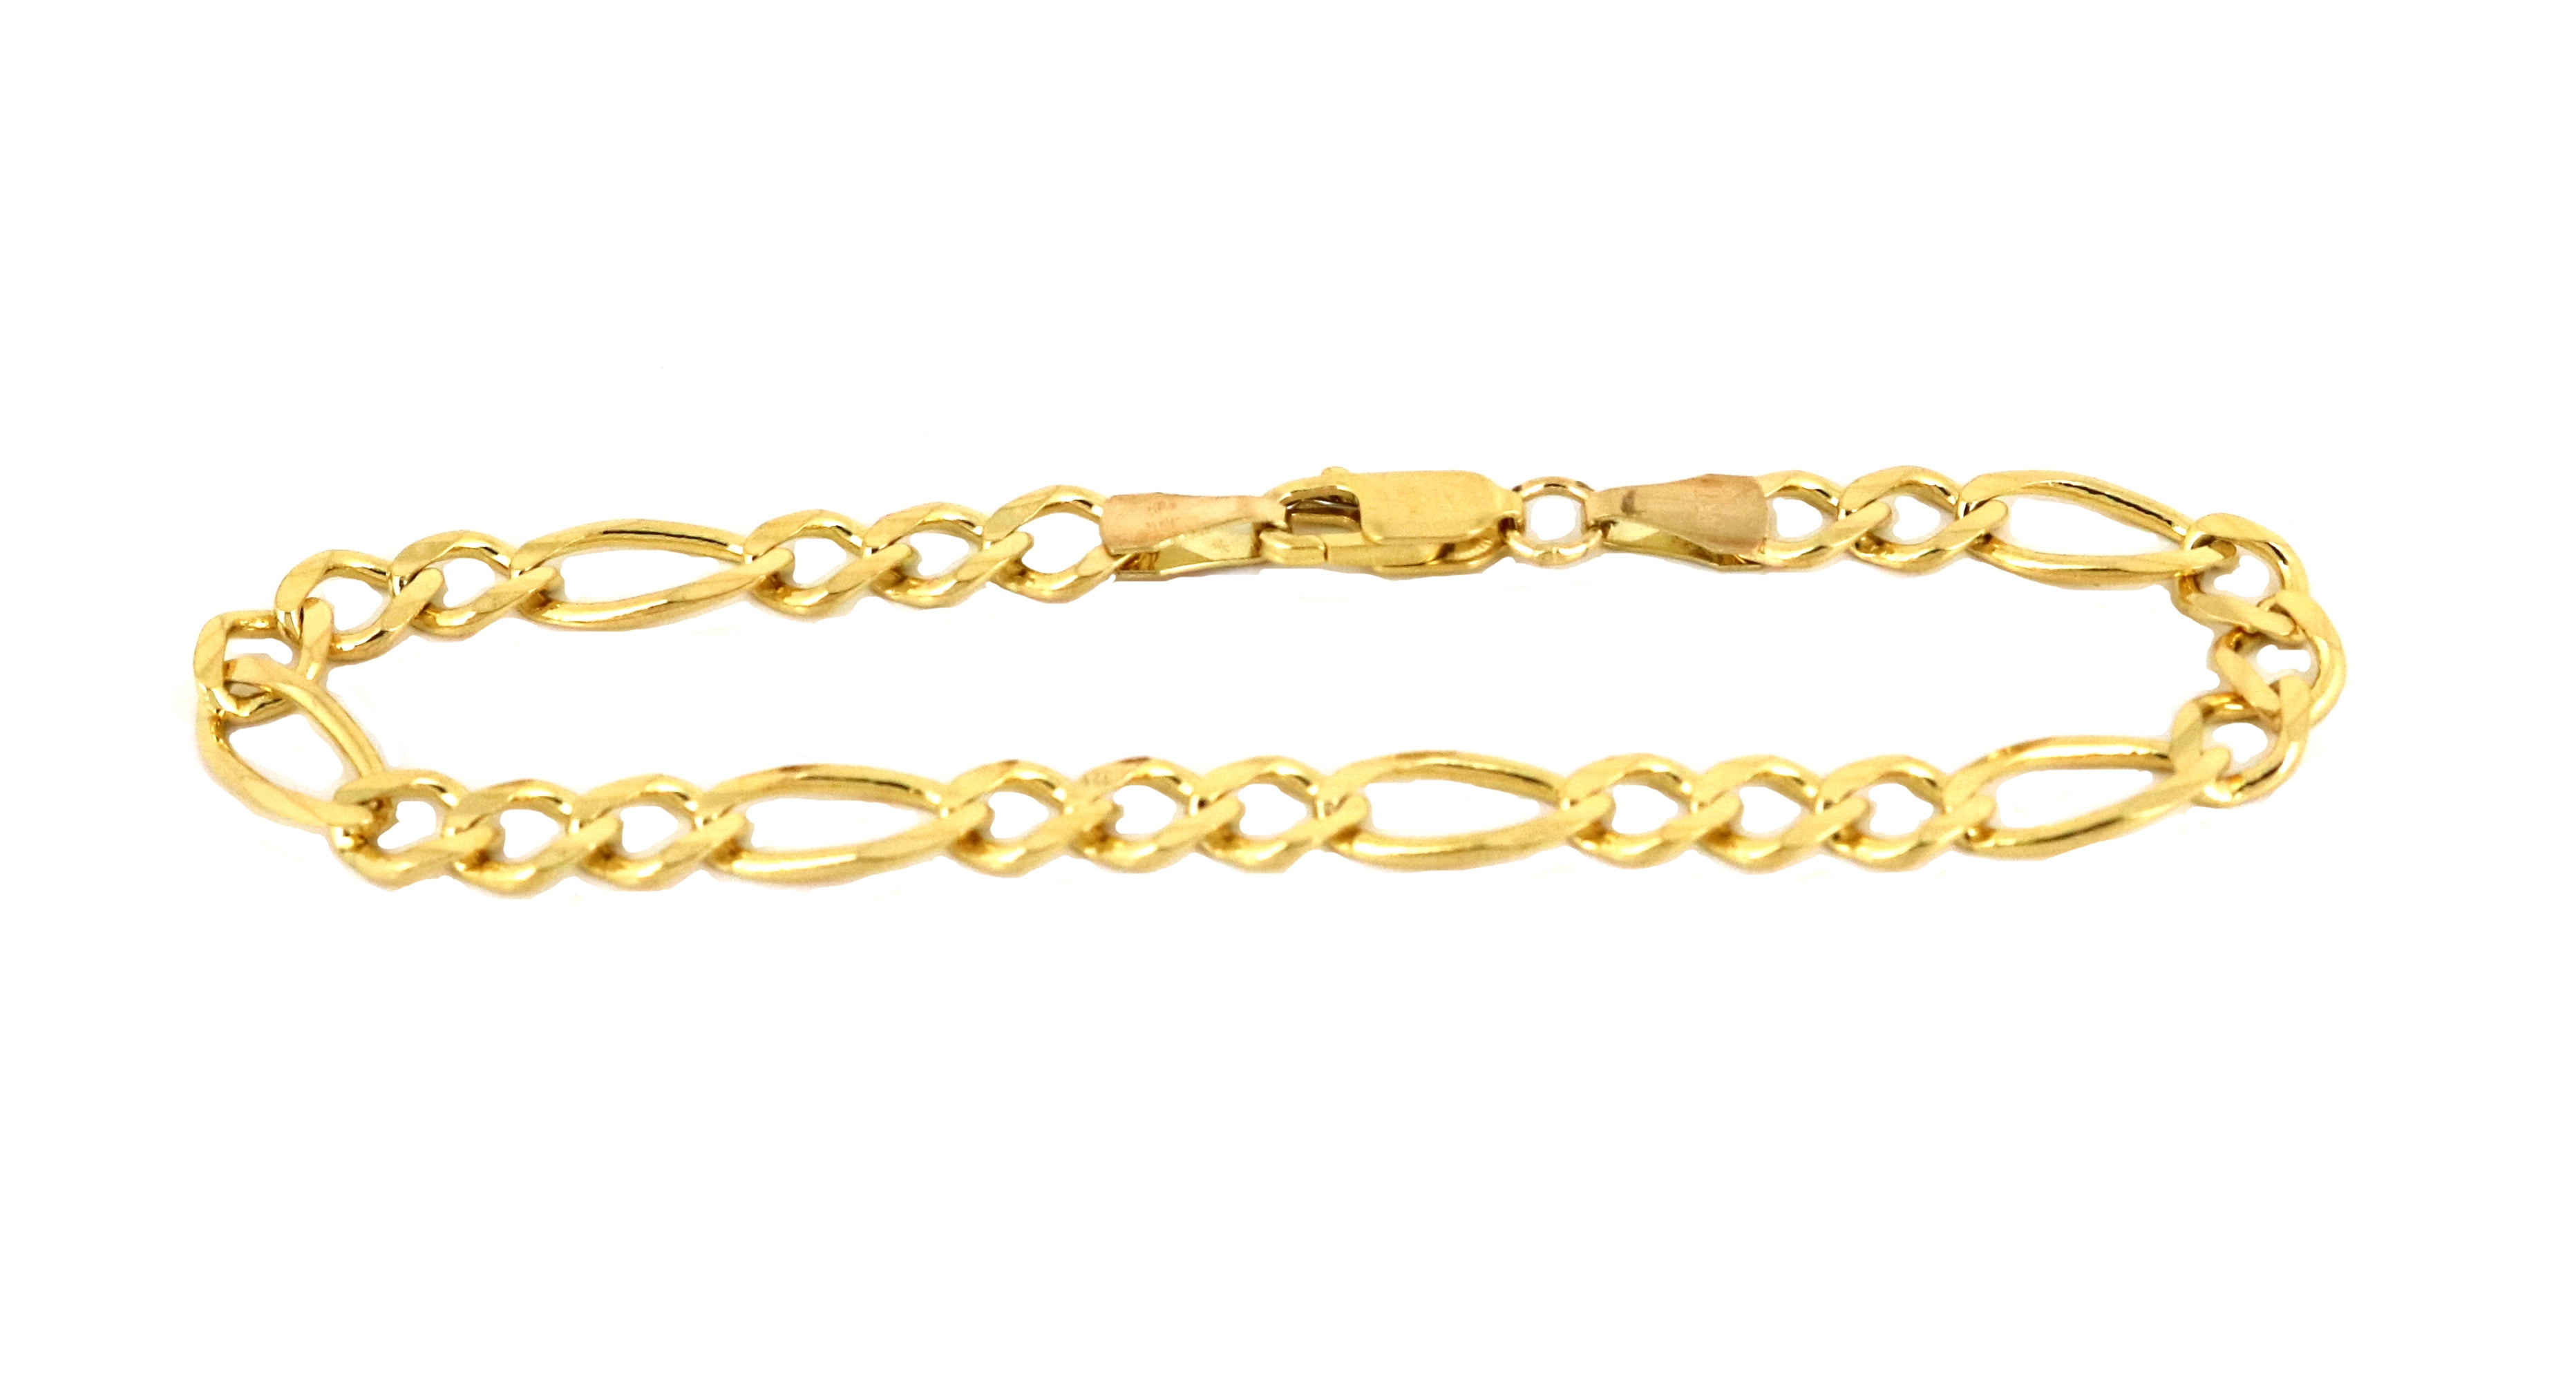 Real 10k Yellow Gold Hollow Figaro Bracelet 2.5mm, 7" to 10" (9")